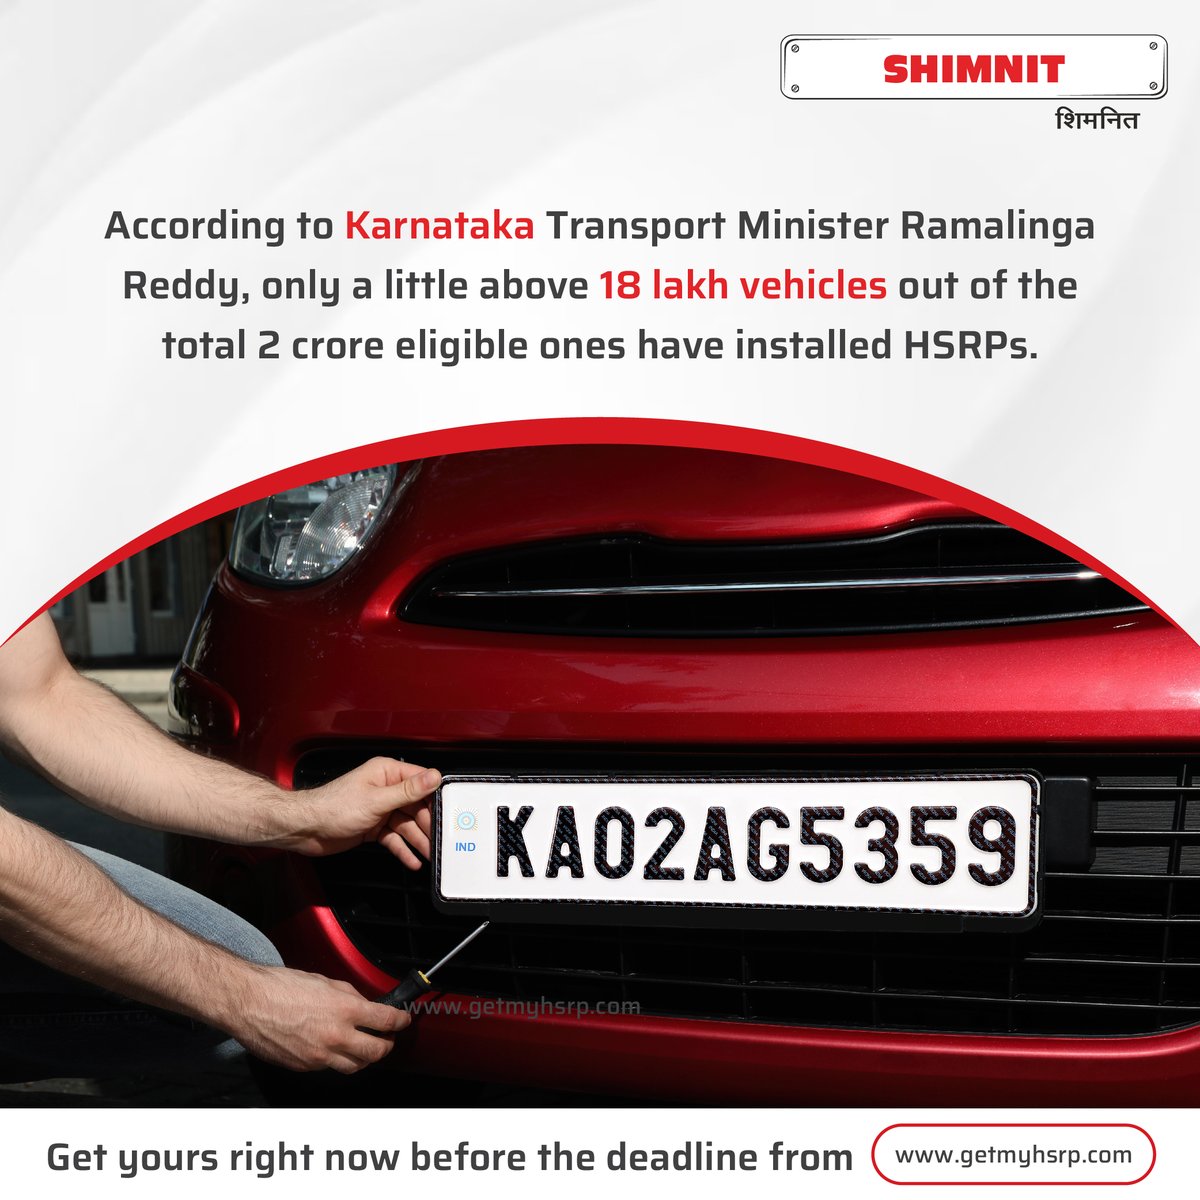 Karnataka vehicle owners, time's running out for HSRP extension compliance! Act now to dodge penalties and ensure road safety.
Visit getmyhsrp.com for hassle-free registration. Drive smart, drive safe!
#HSRP #Karnataka #GetMyHSRP